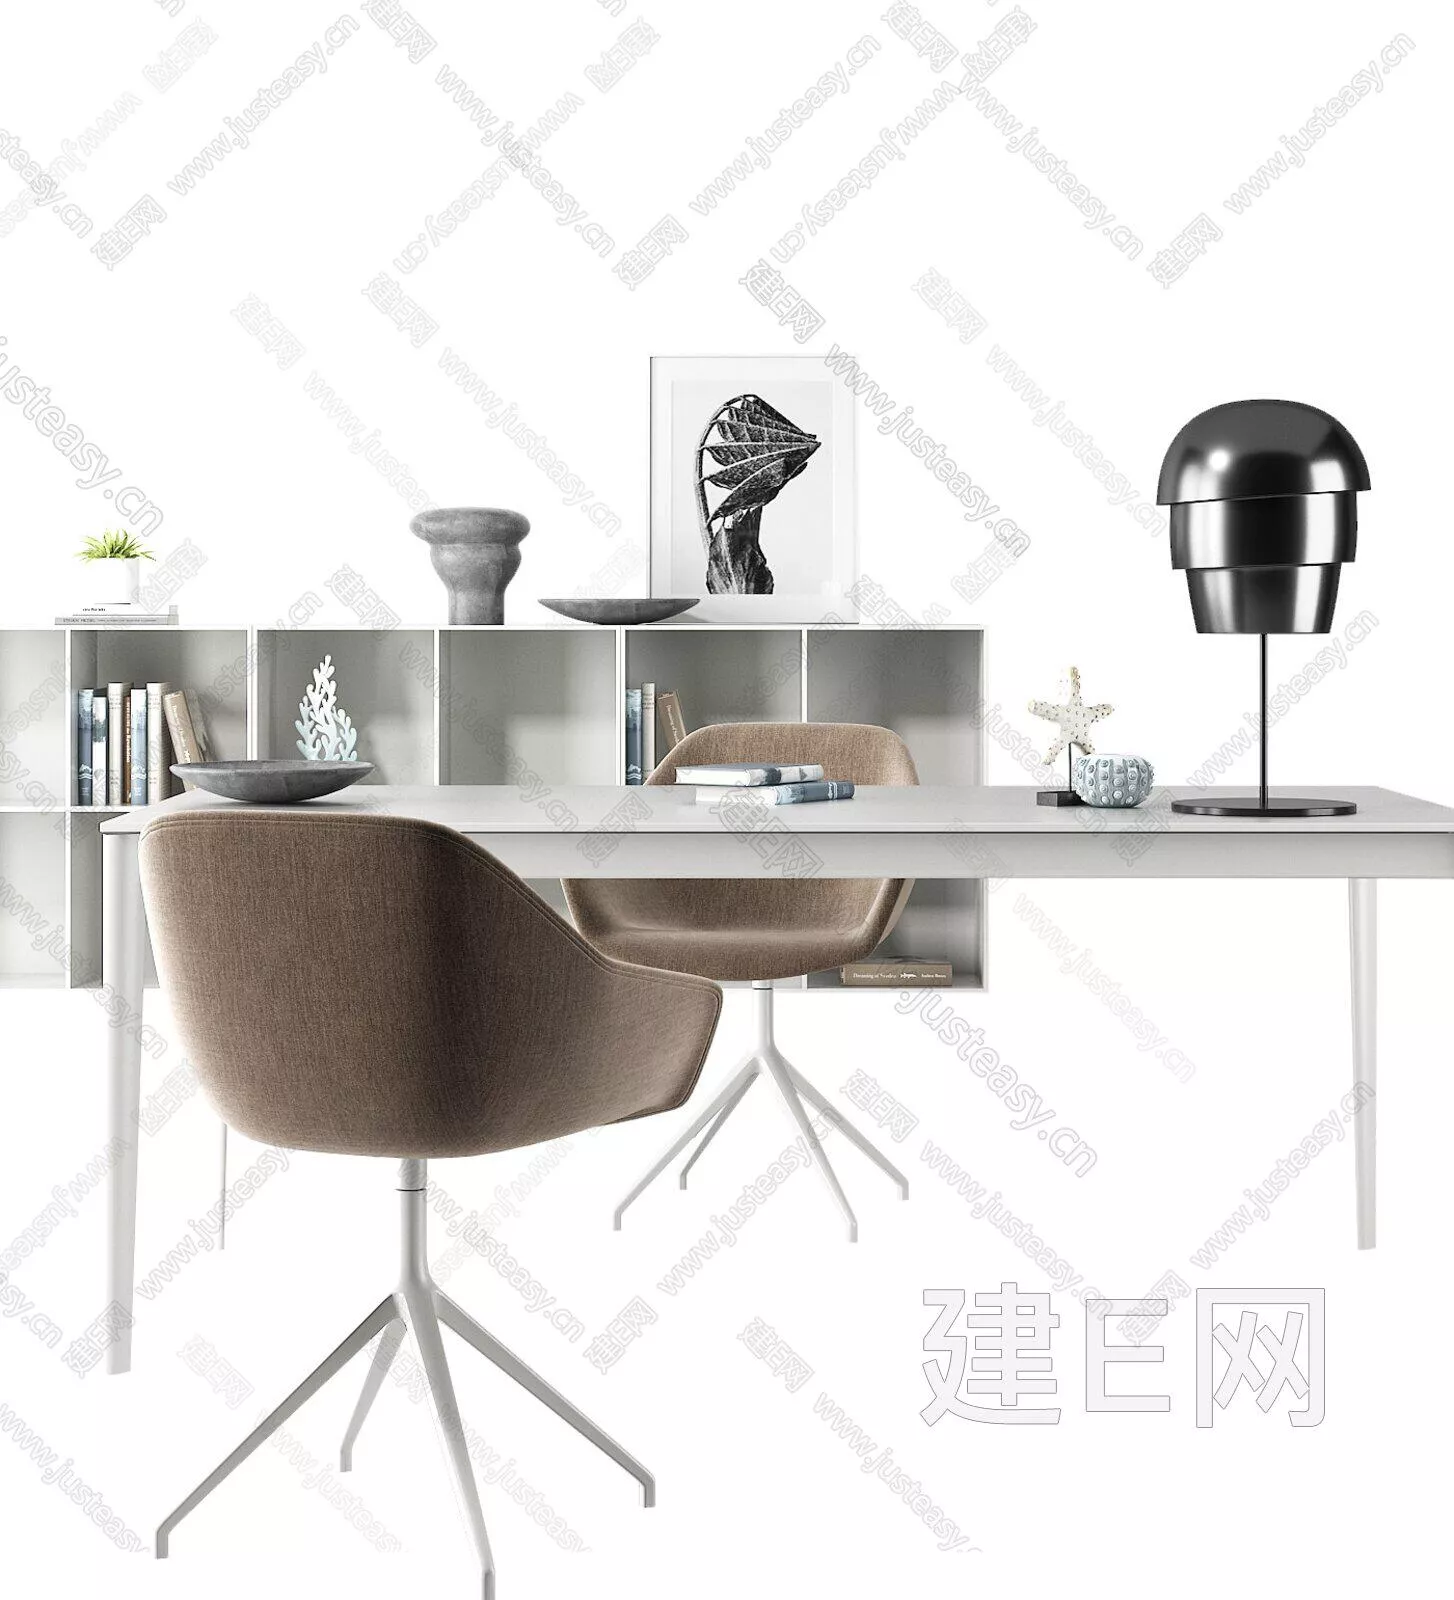 MODERN DESK AND CHAIRS - SKETCHUP 3D MODEL - ENSCAPE - 104941714